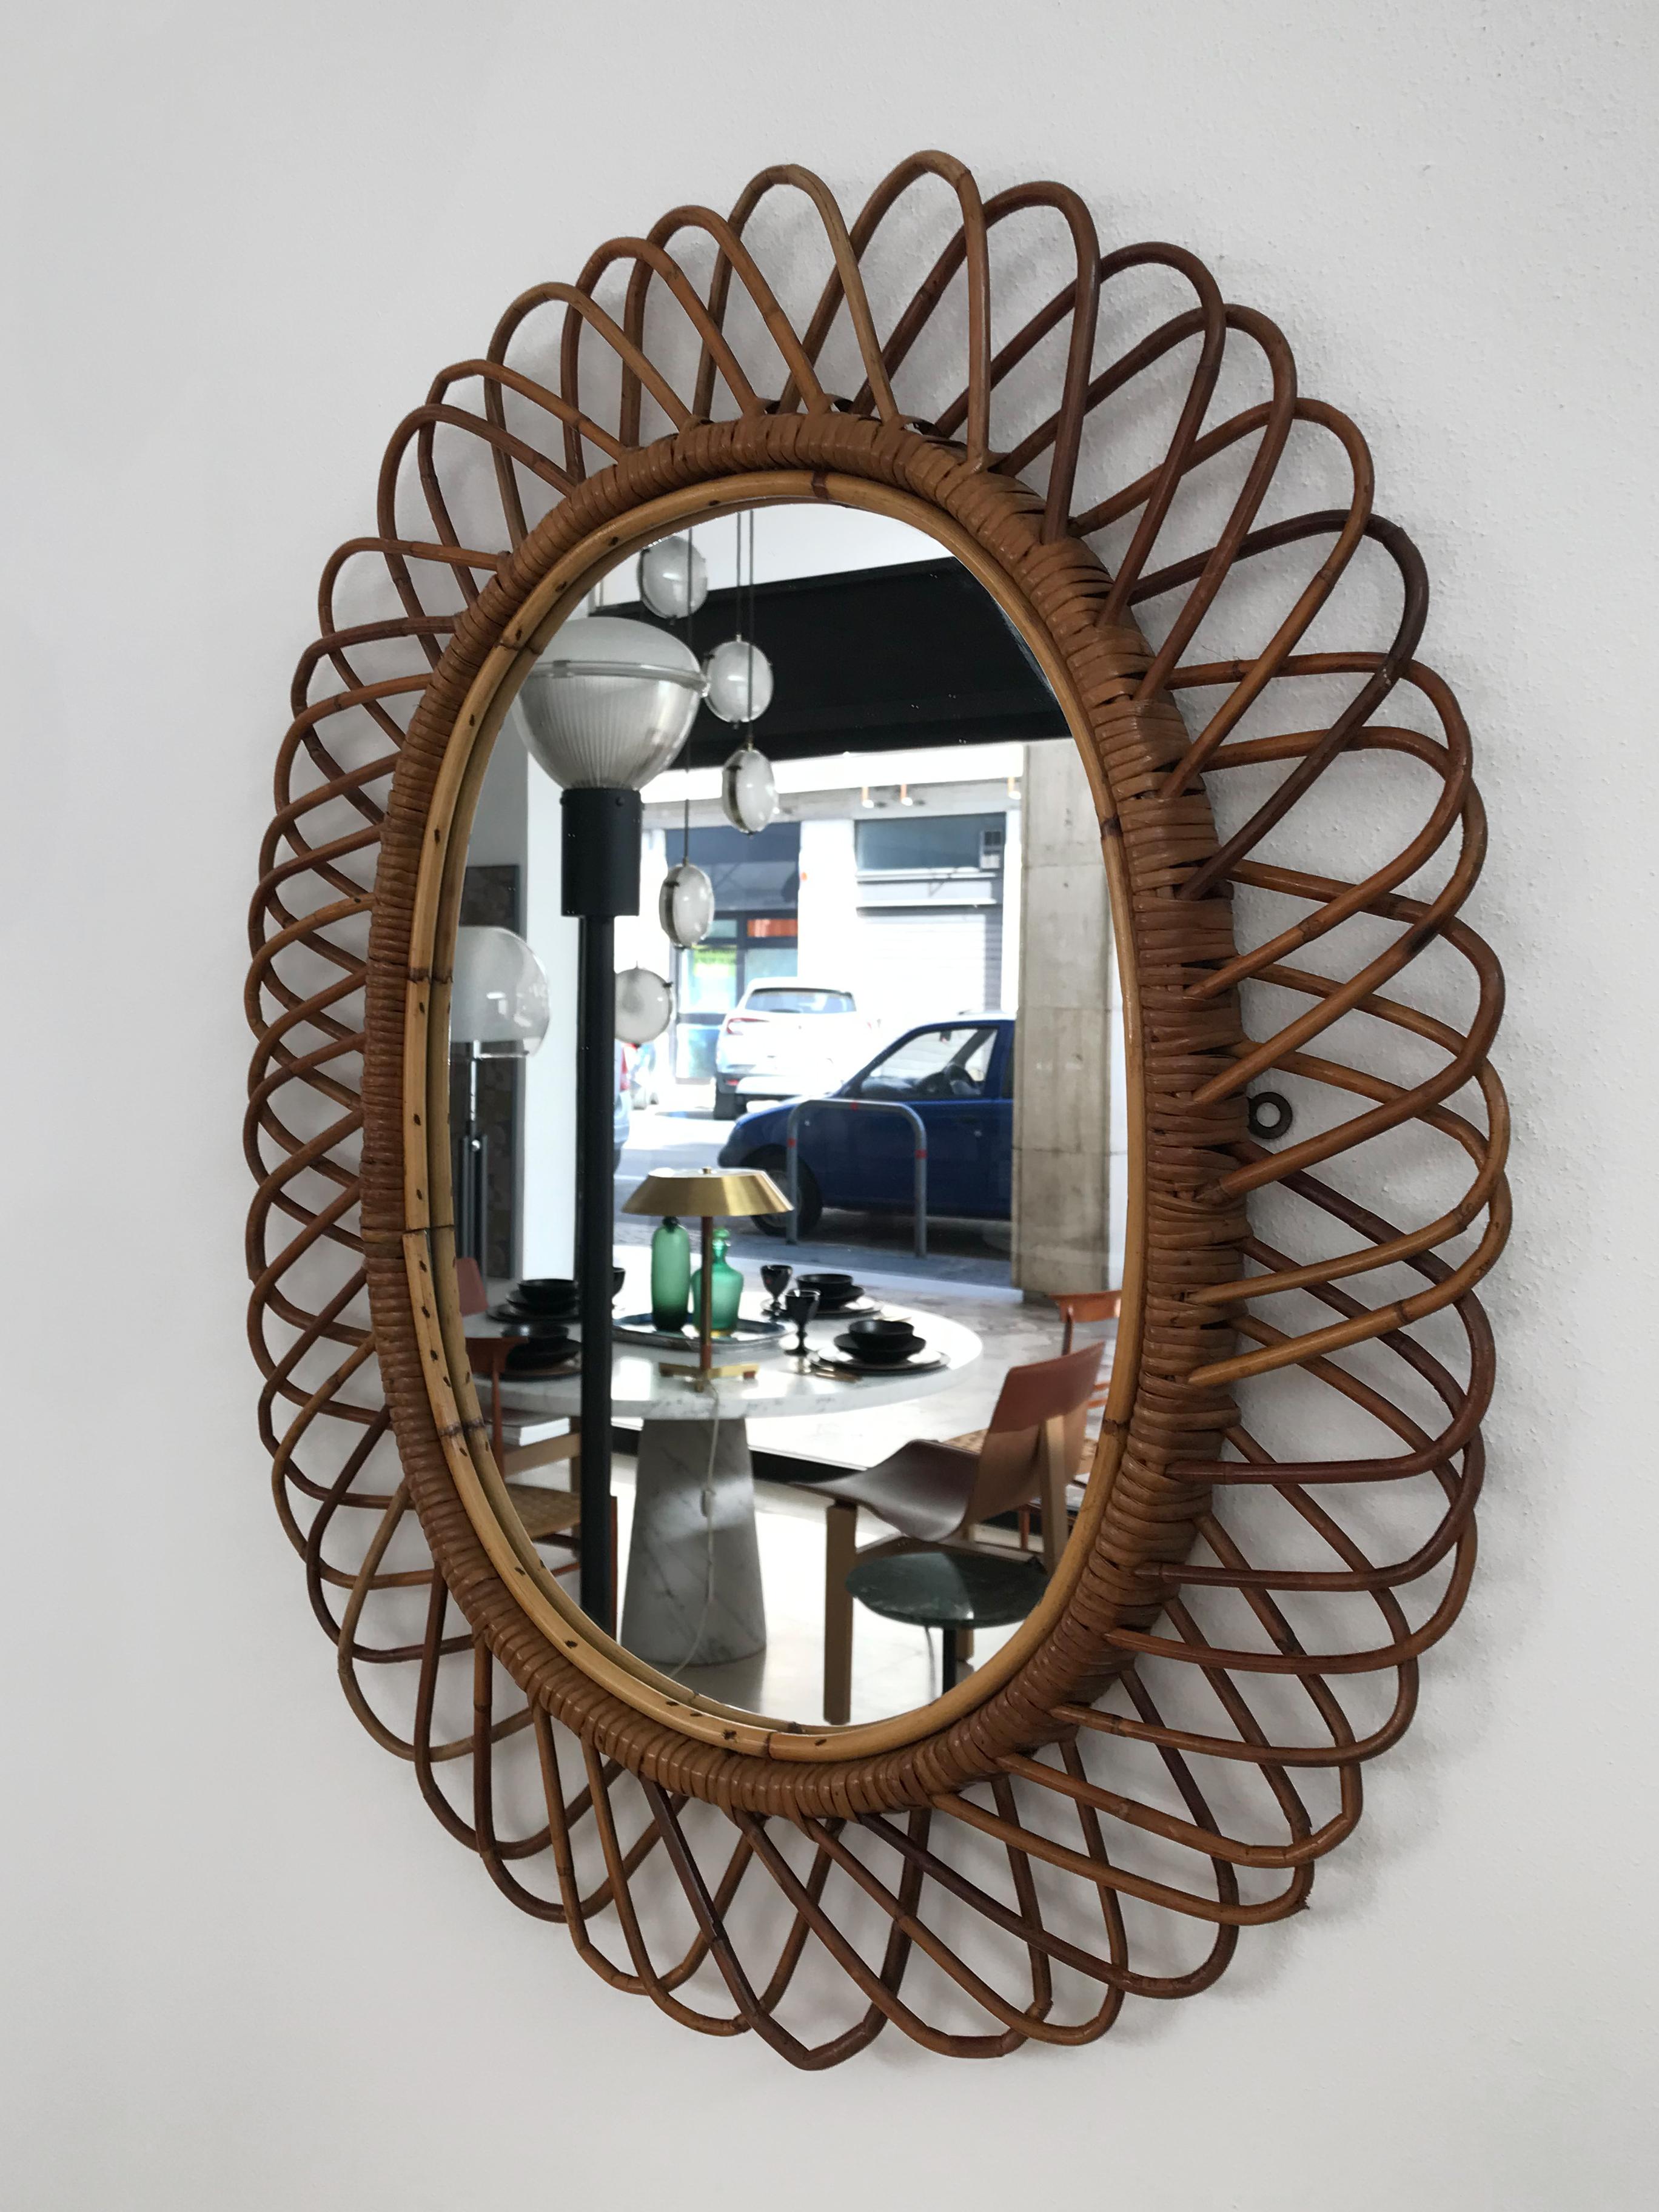 Italian Mid-Century Modern design oval bamboo rattan wall mirror, Italy 1950.
The mirror can be placed either vertically or horizontally.

Please note that the items is original of the period and this shows normal signs of age and use.